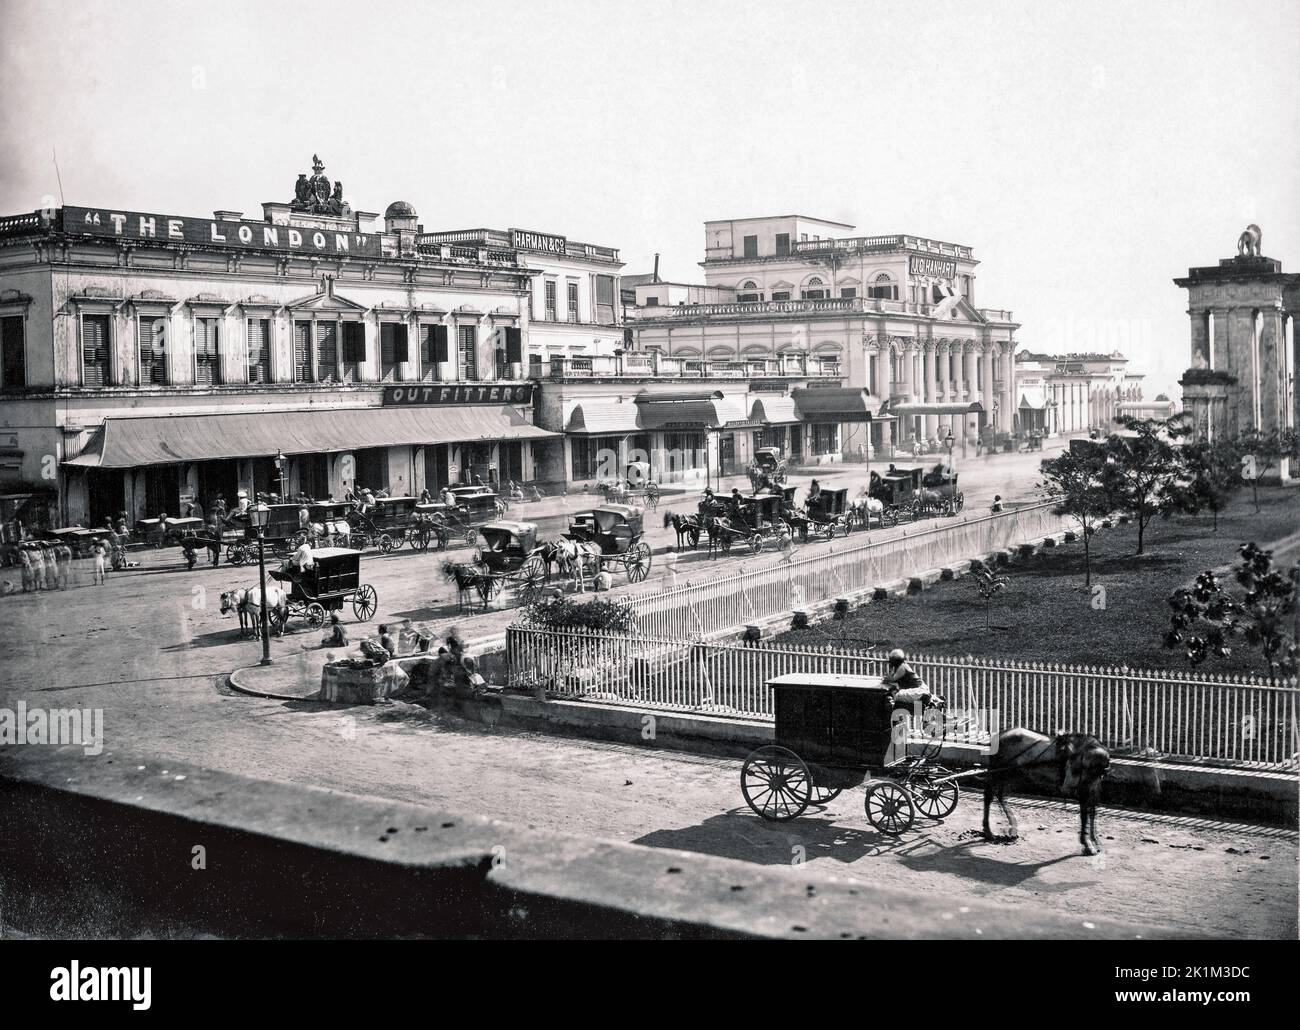 Old Court House Street, Kolkata, (formally Calcutta), India in the 1860's.  Possibly by British photographer Samuel Bourne, 1834 - 1912. Stock Photo